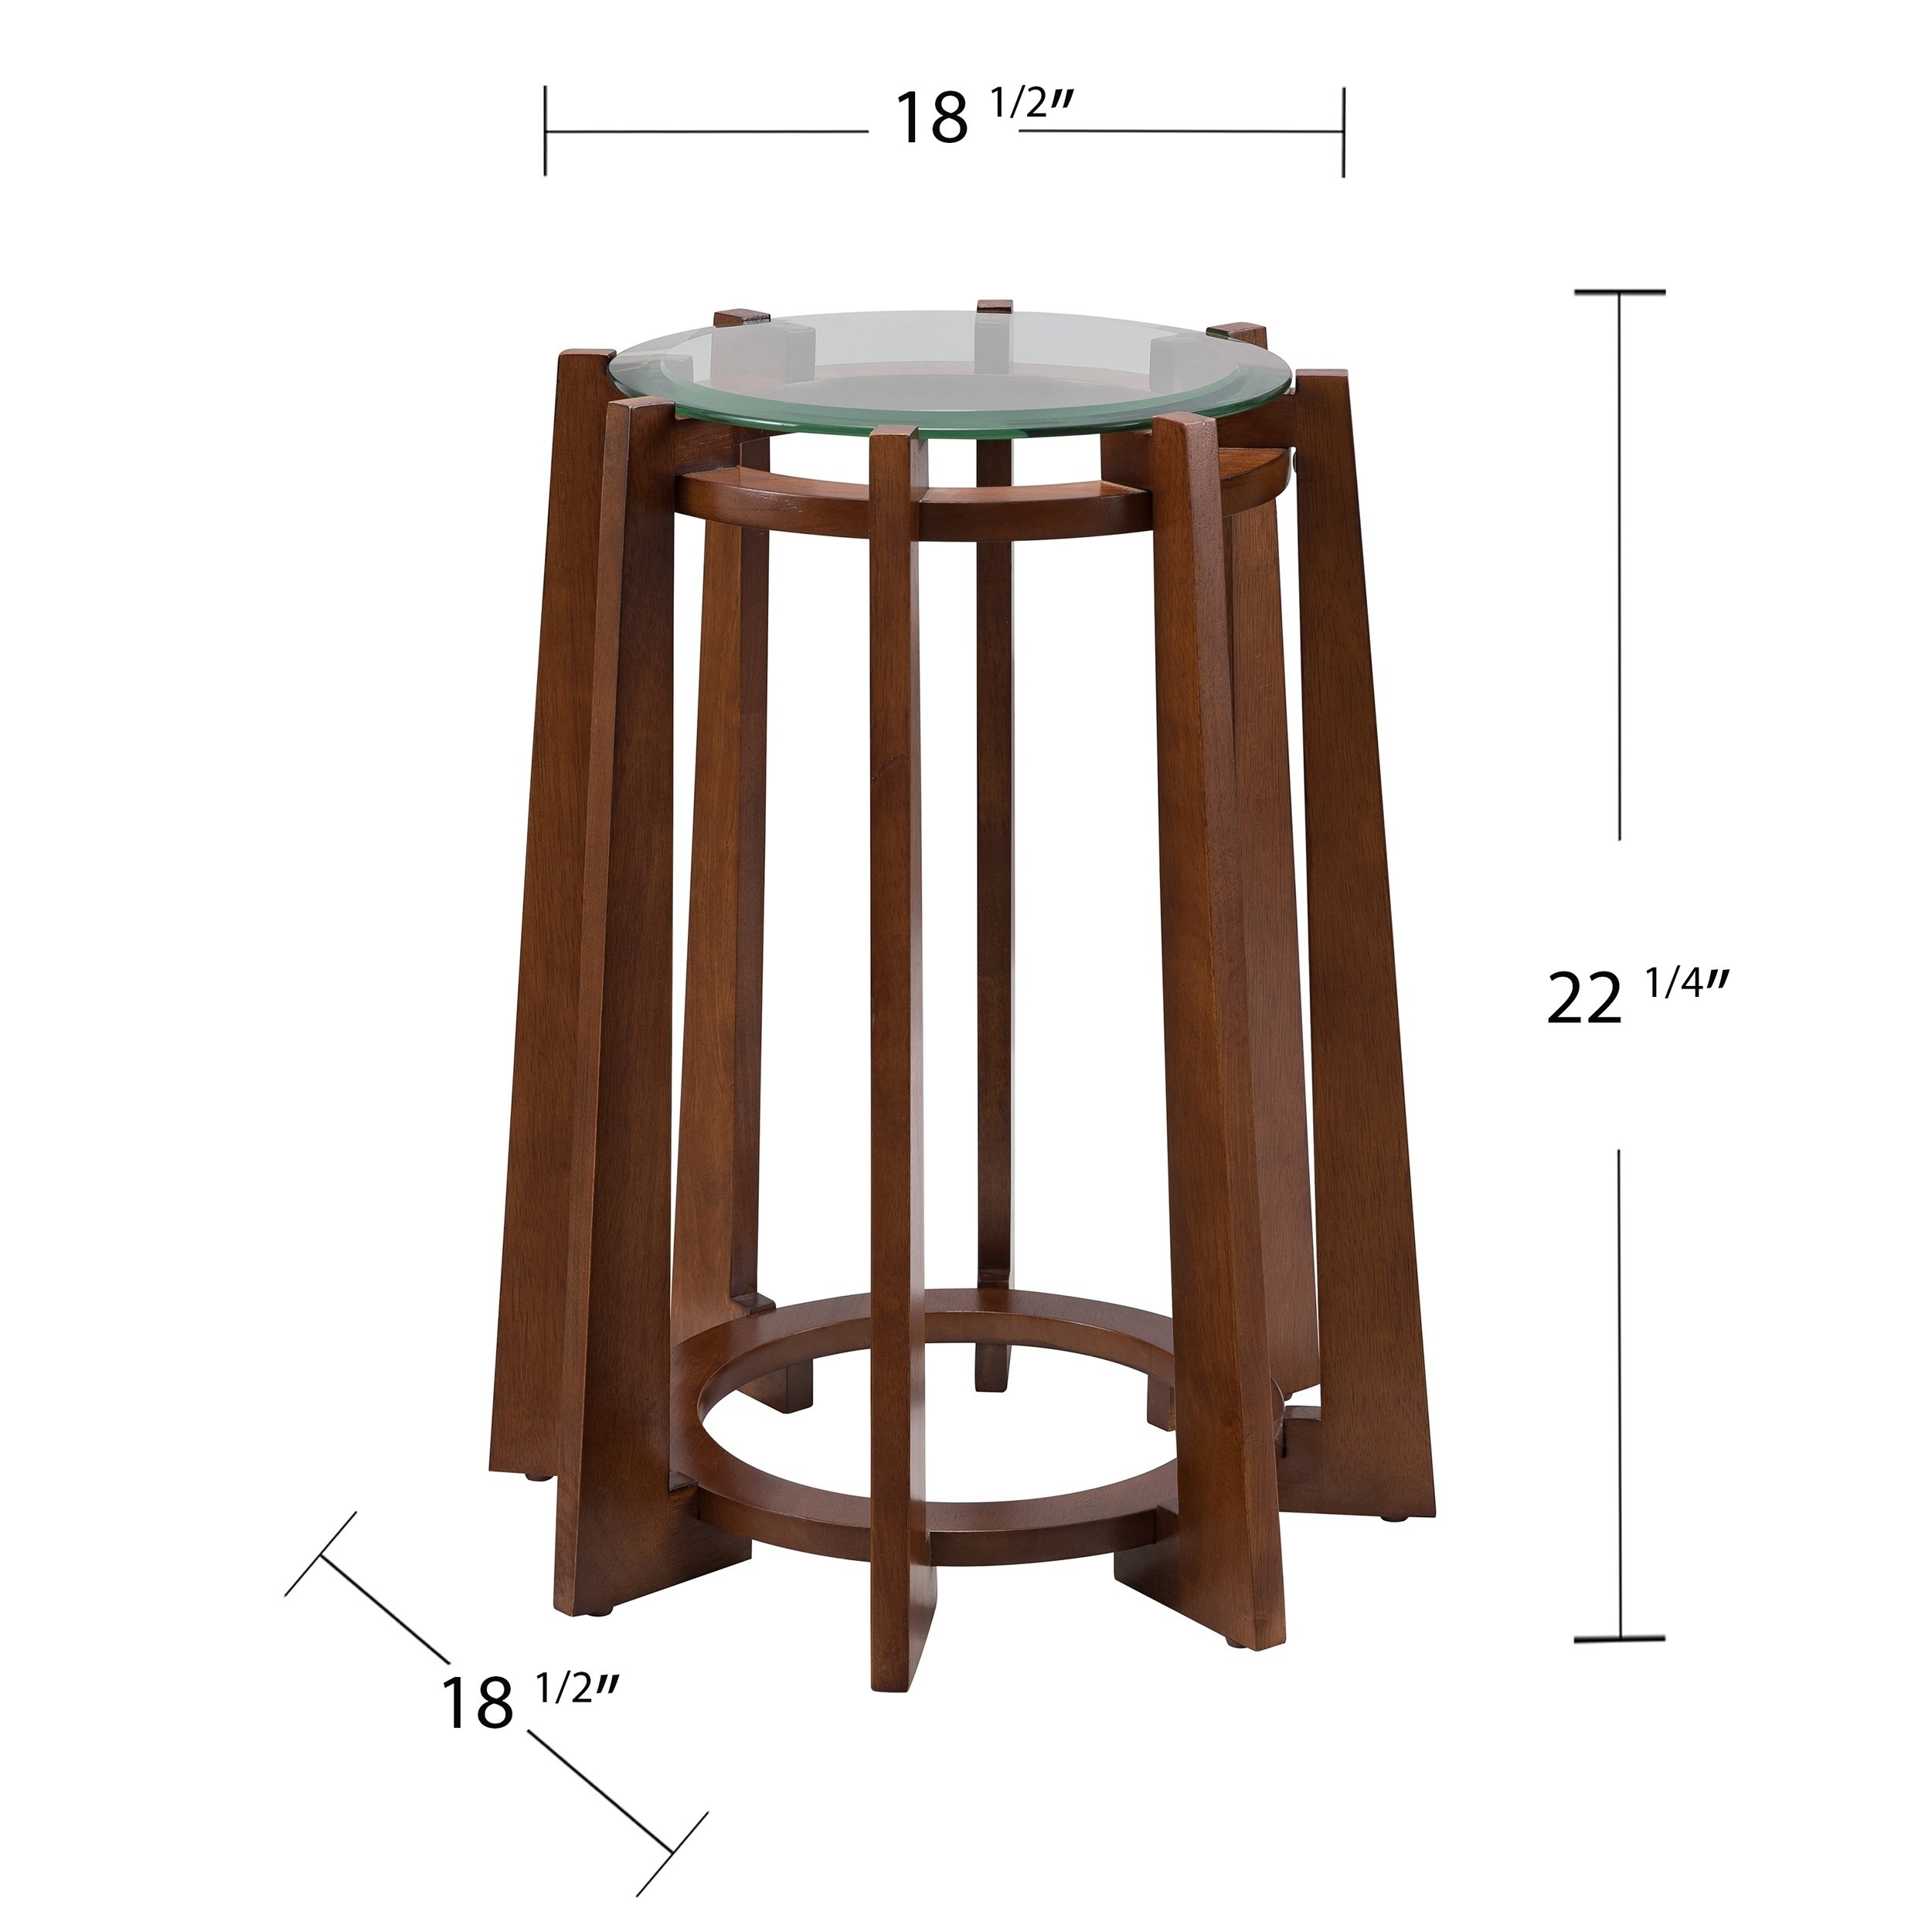 holly martin colvi midcentury modern round accent table mid century free shipping today weathered wood end and side dorm room packages low trestle patio umbrella base mosaic